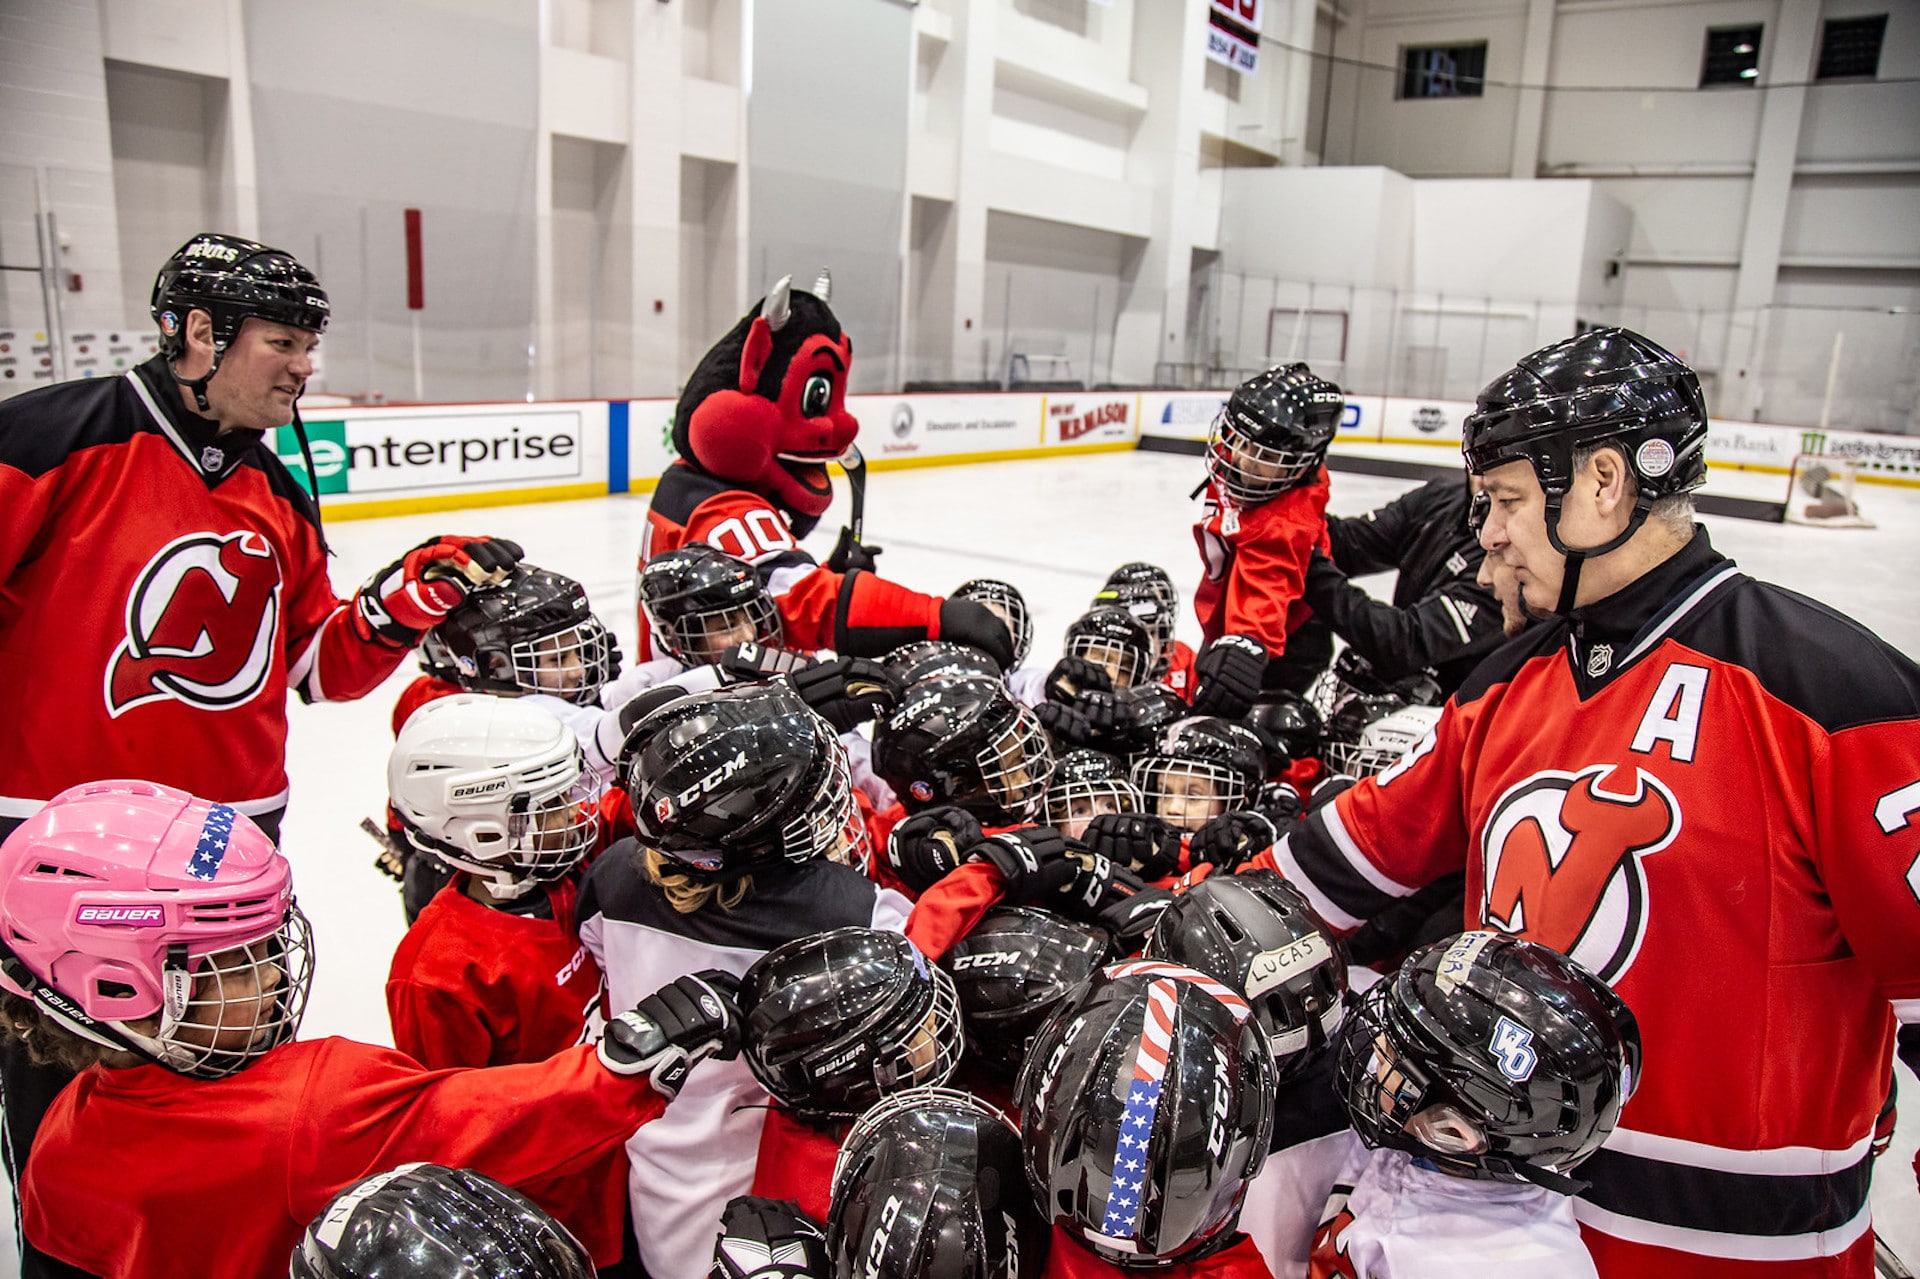 New Jersey Devils : Team Discussion